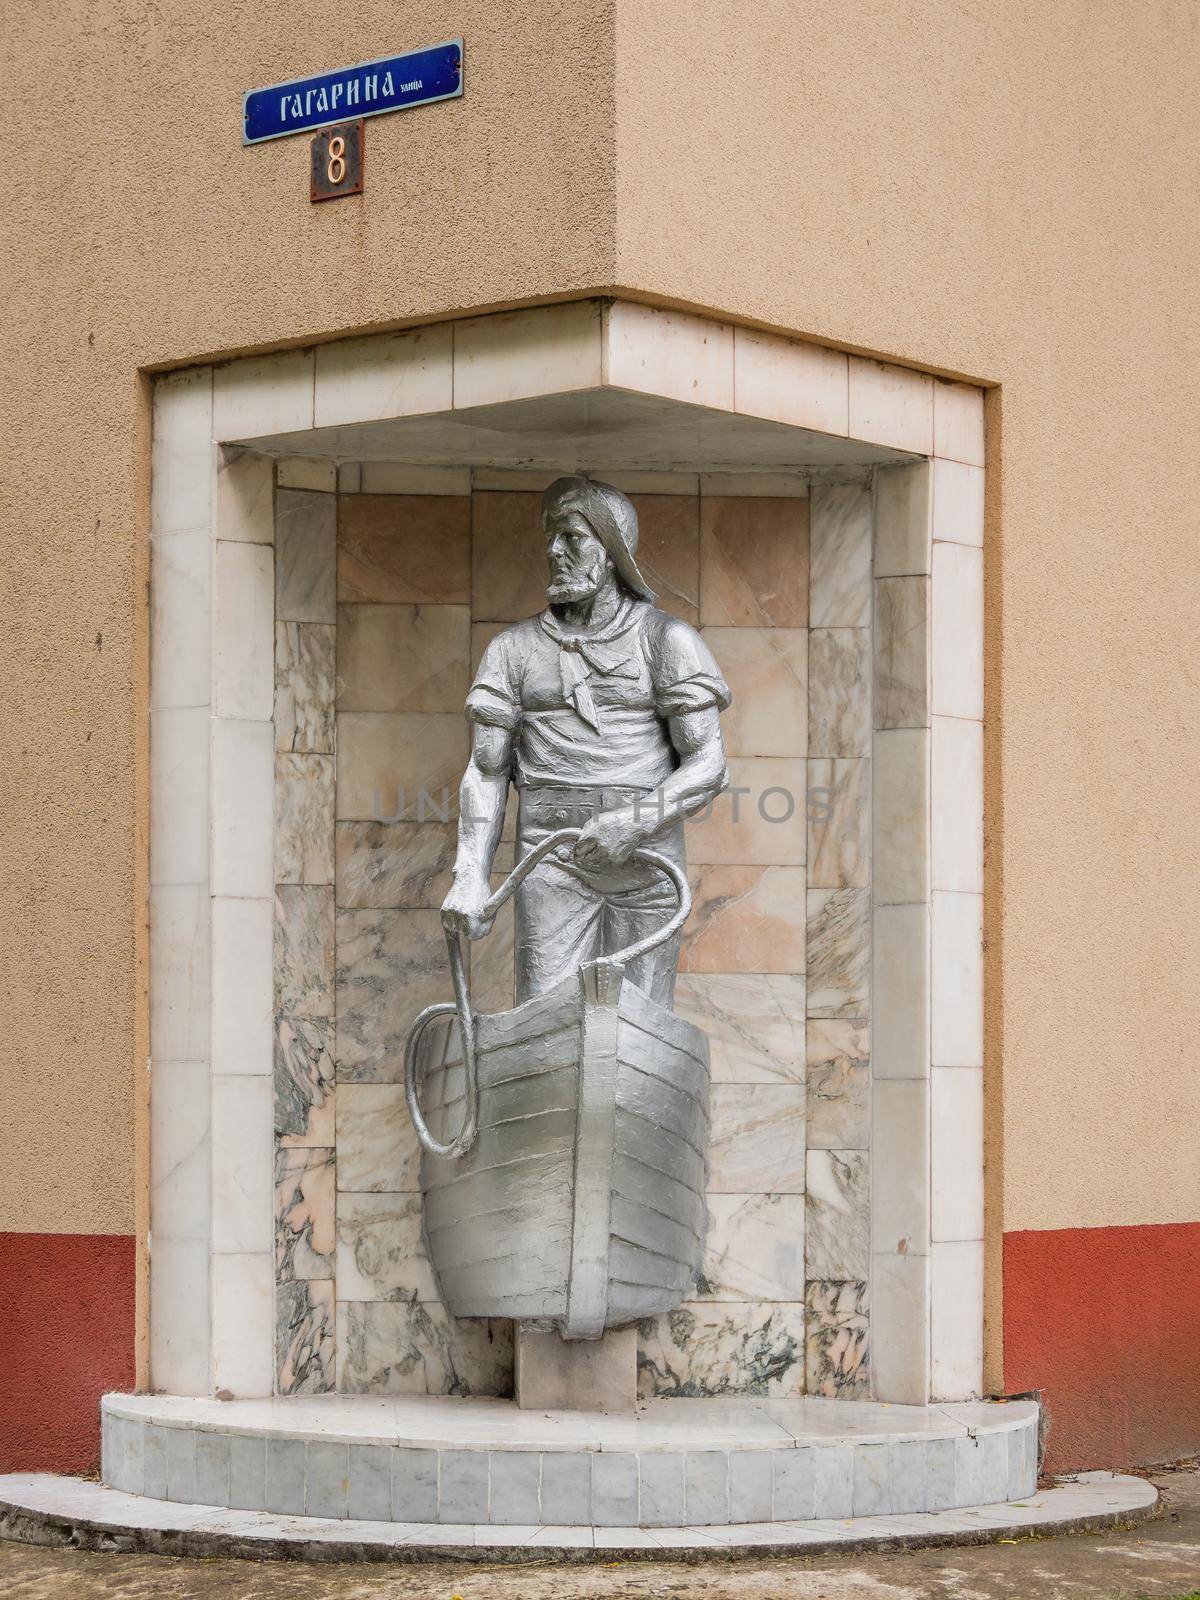 SVETLOGORSK, RUSSIA - July 21, 2019. Old monument dedicated to fisherman built into corner of apartment building. by aksenovko